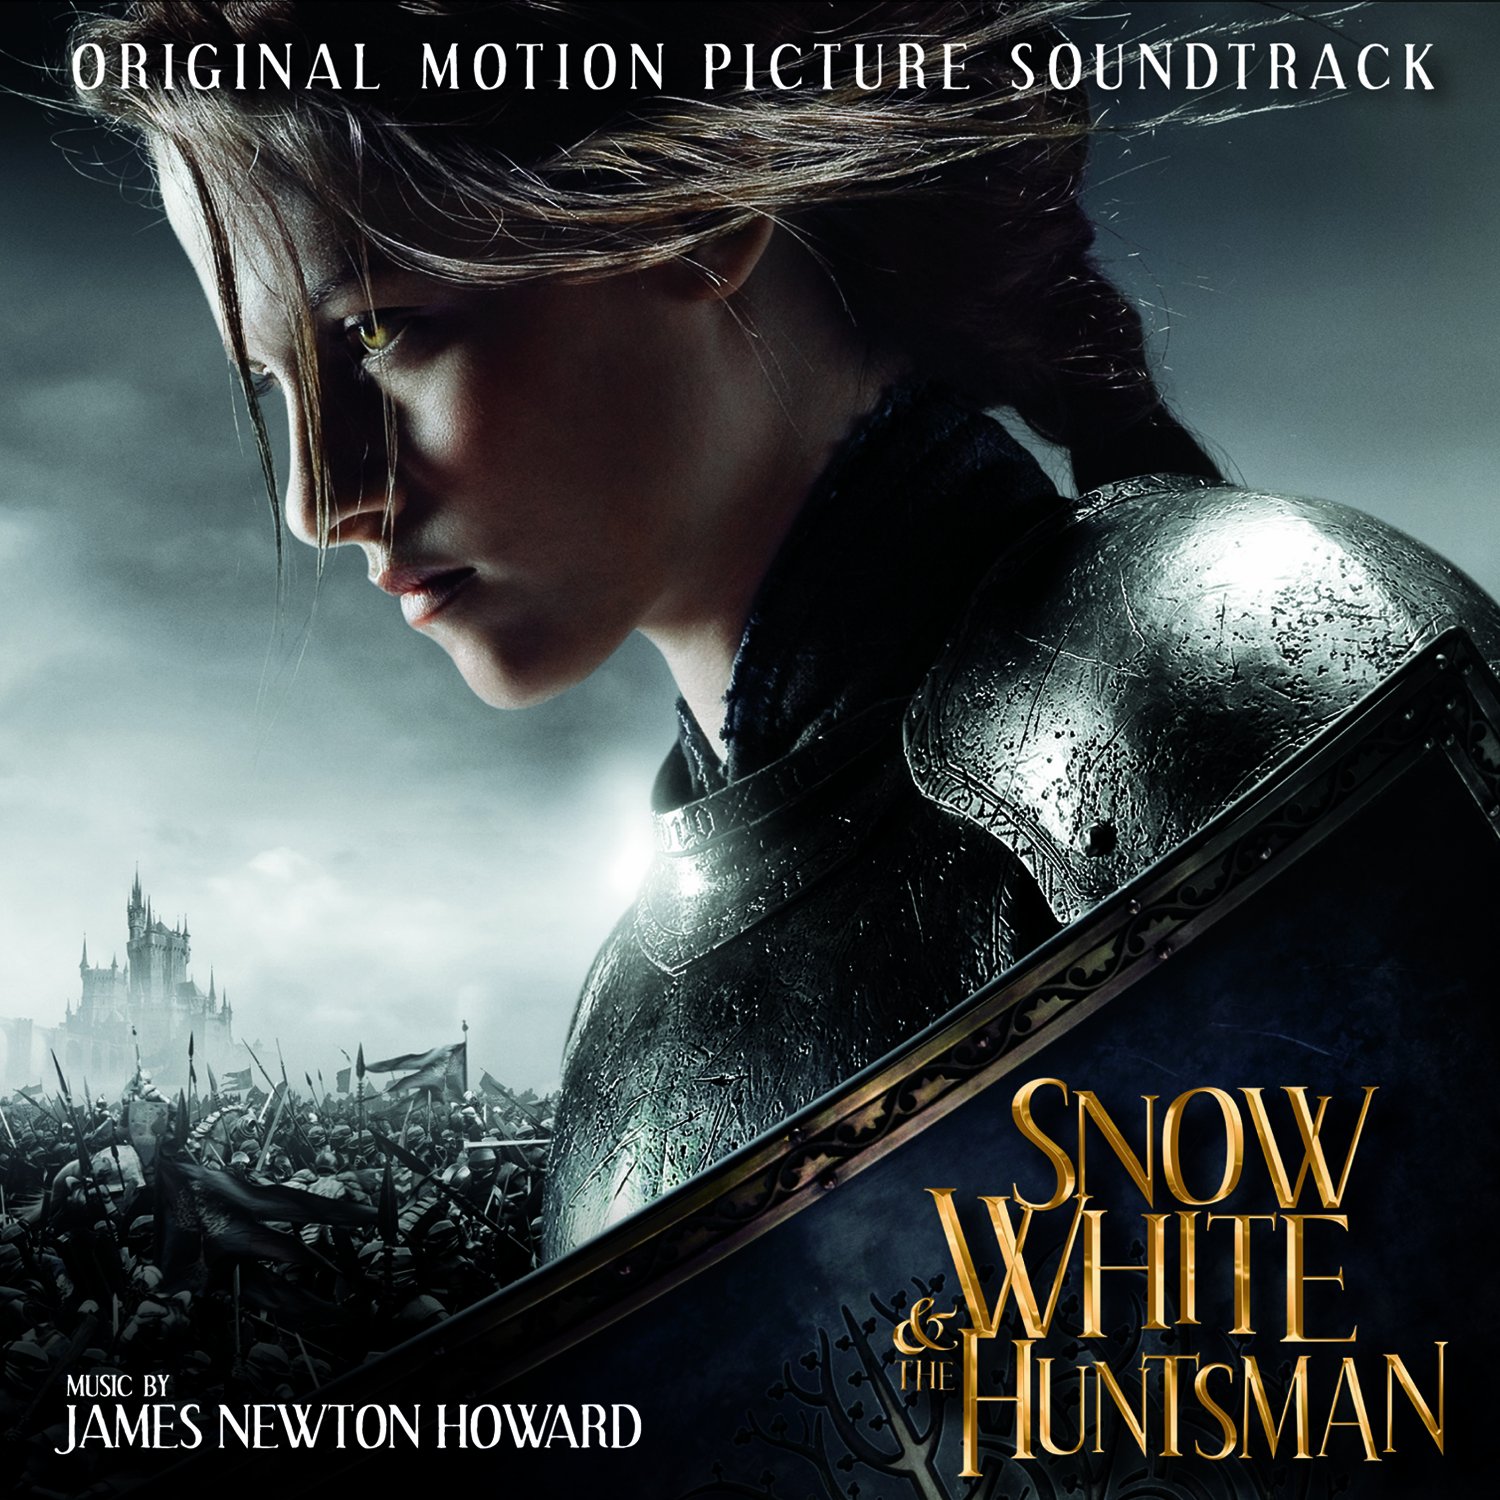 Artwork for the soundtrack to Snow White and the Huntsman